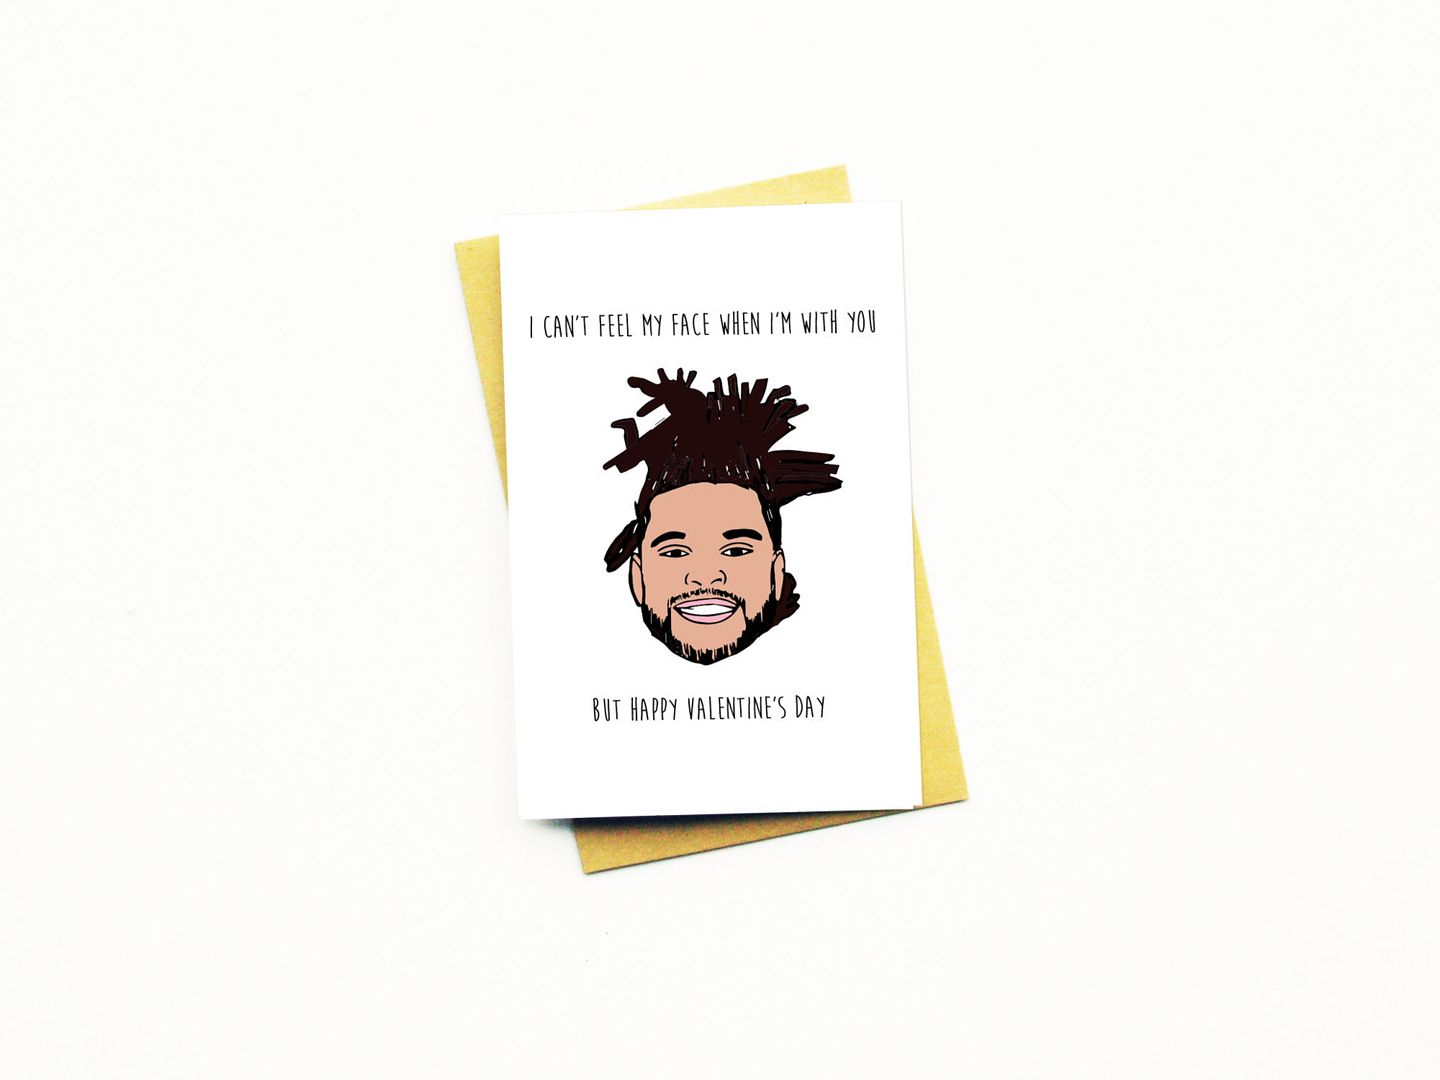 Funny Valentine's Cards: The Weeknd + I can't feel my face